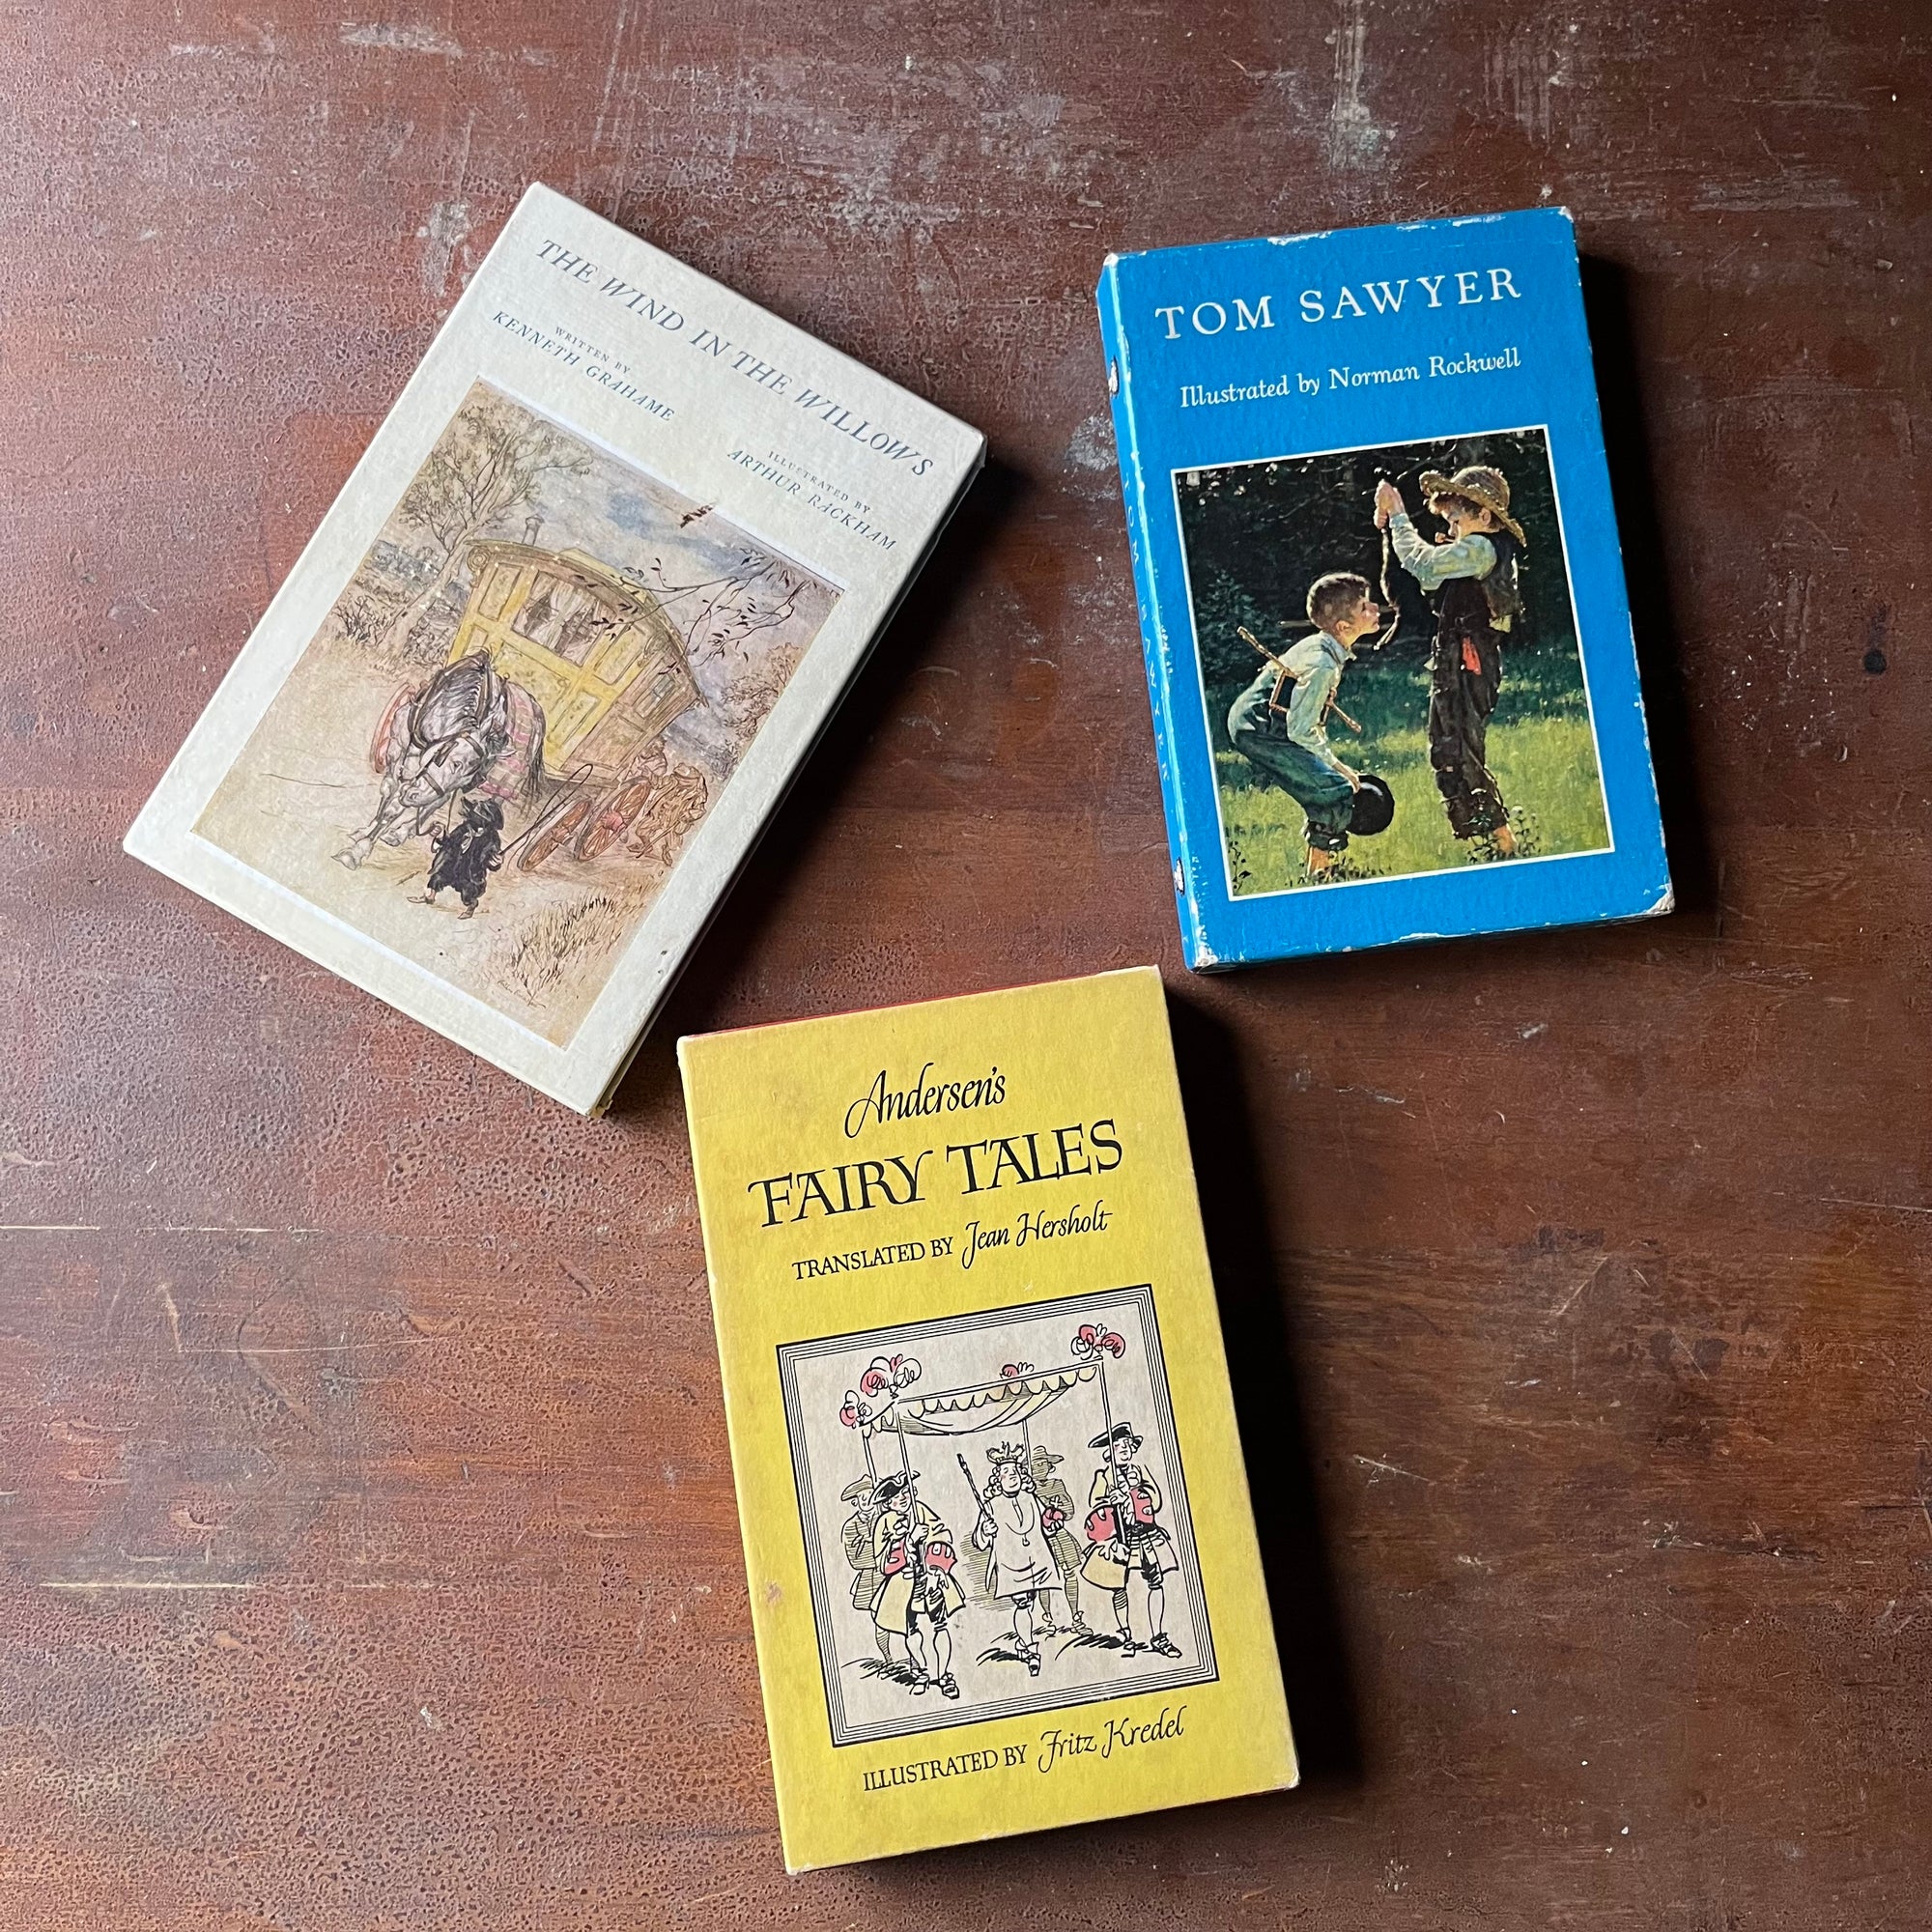 The Heritage Illustrated Bookshelf-Set of Three Books-Andersen's Fairy Tales, The Wind in the Willows & Tom Sawyer-view of the front of the book sleeves with illustrations & book titles listed